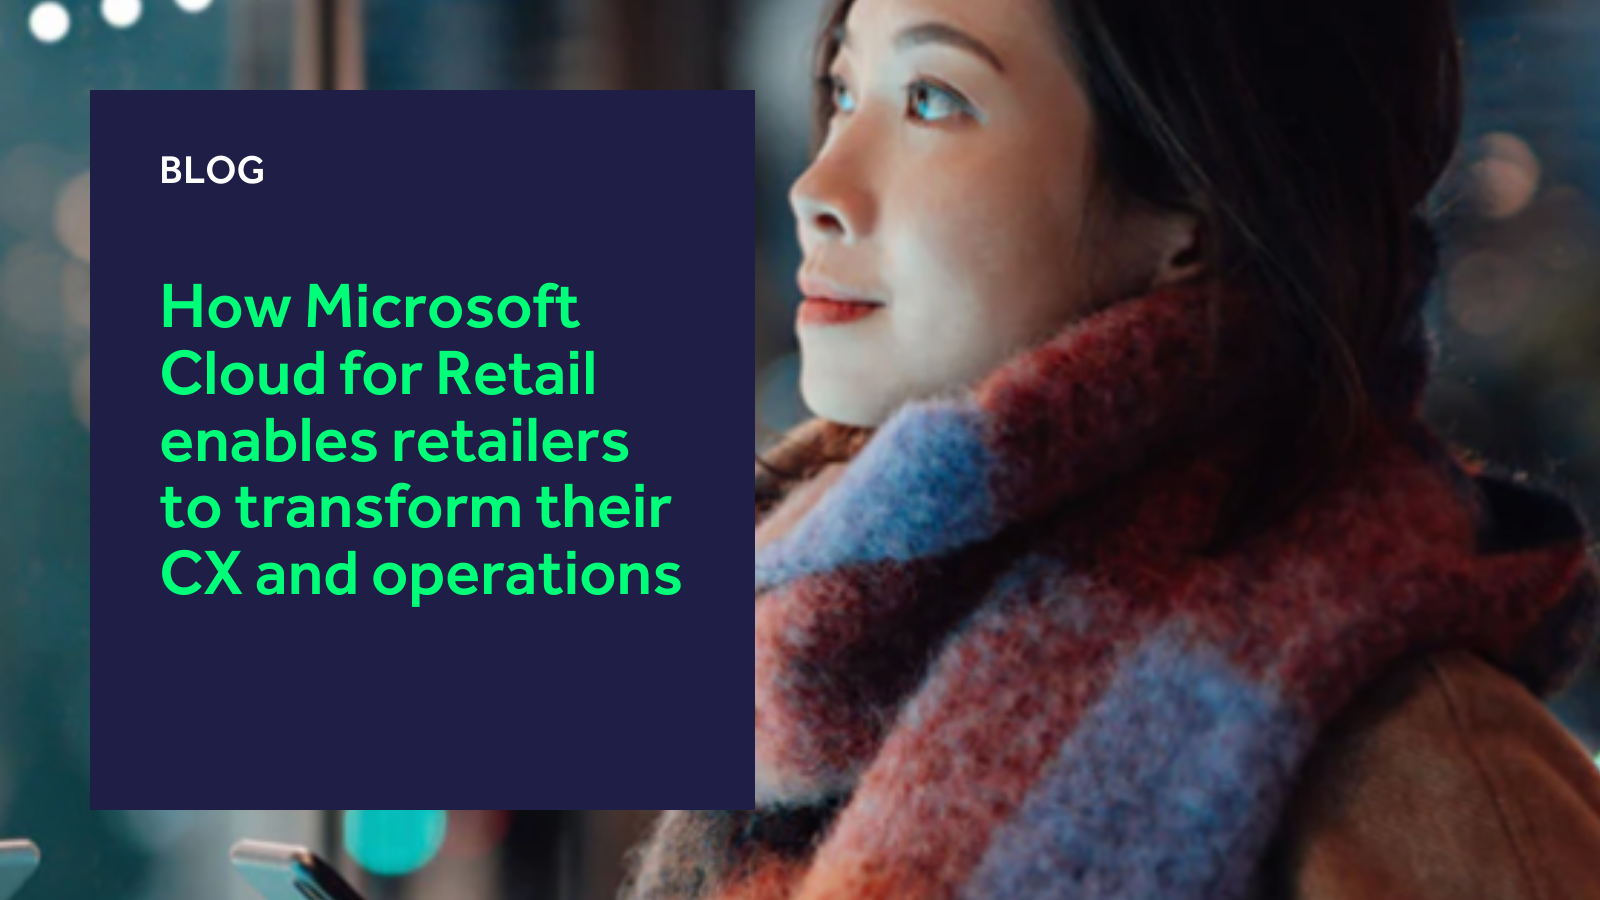 How Microsoft Cloud for Retail enables retailers to transform their CX and operations